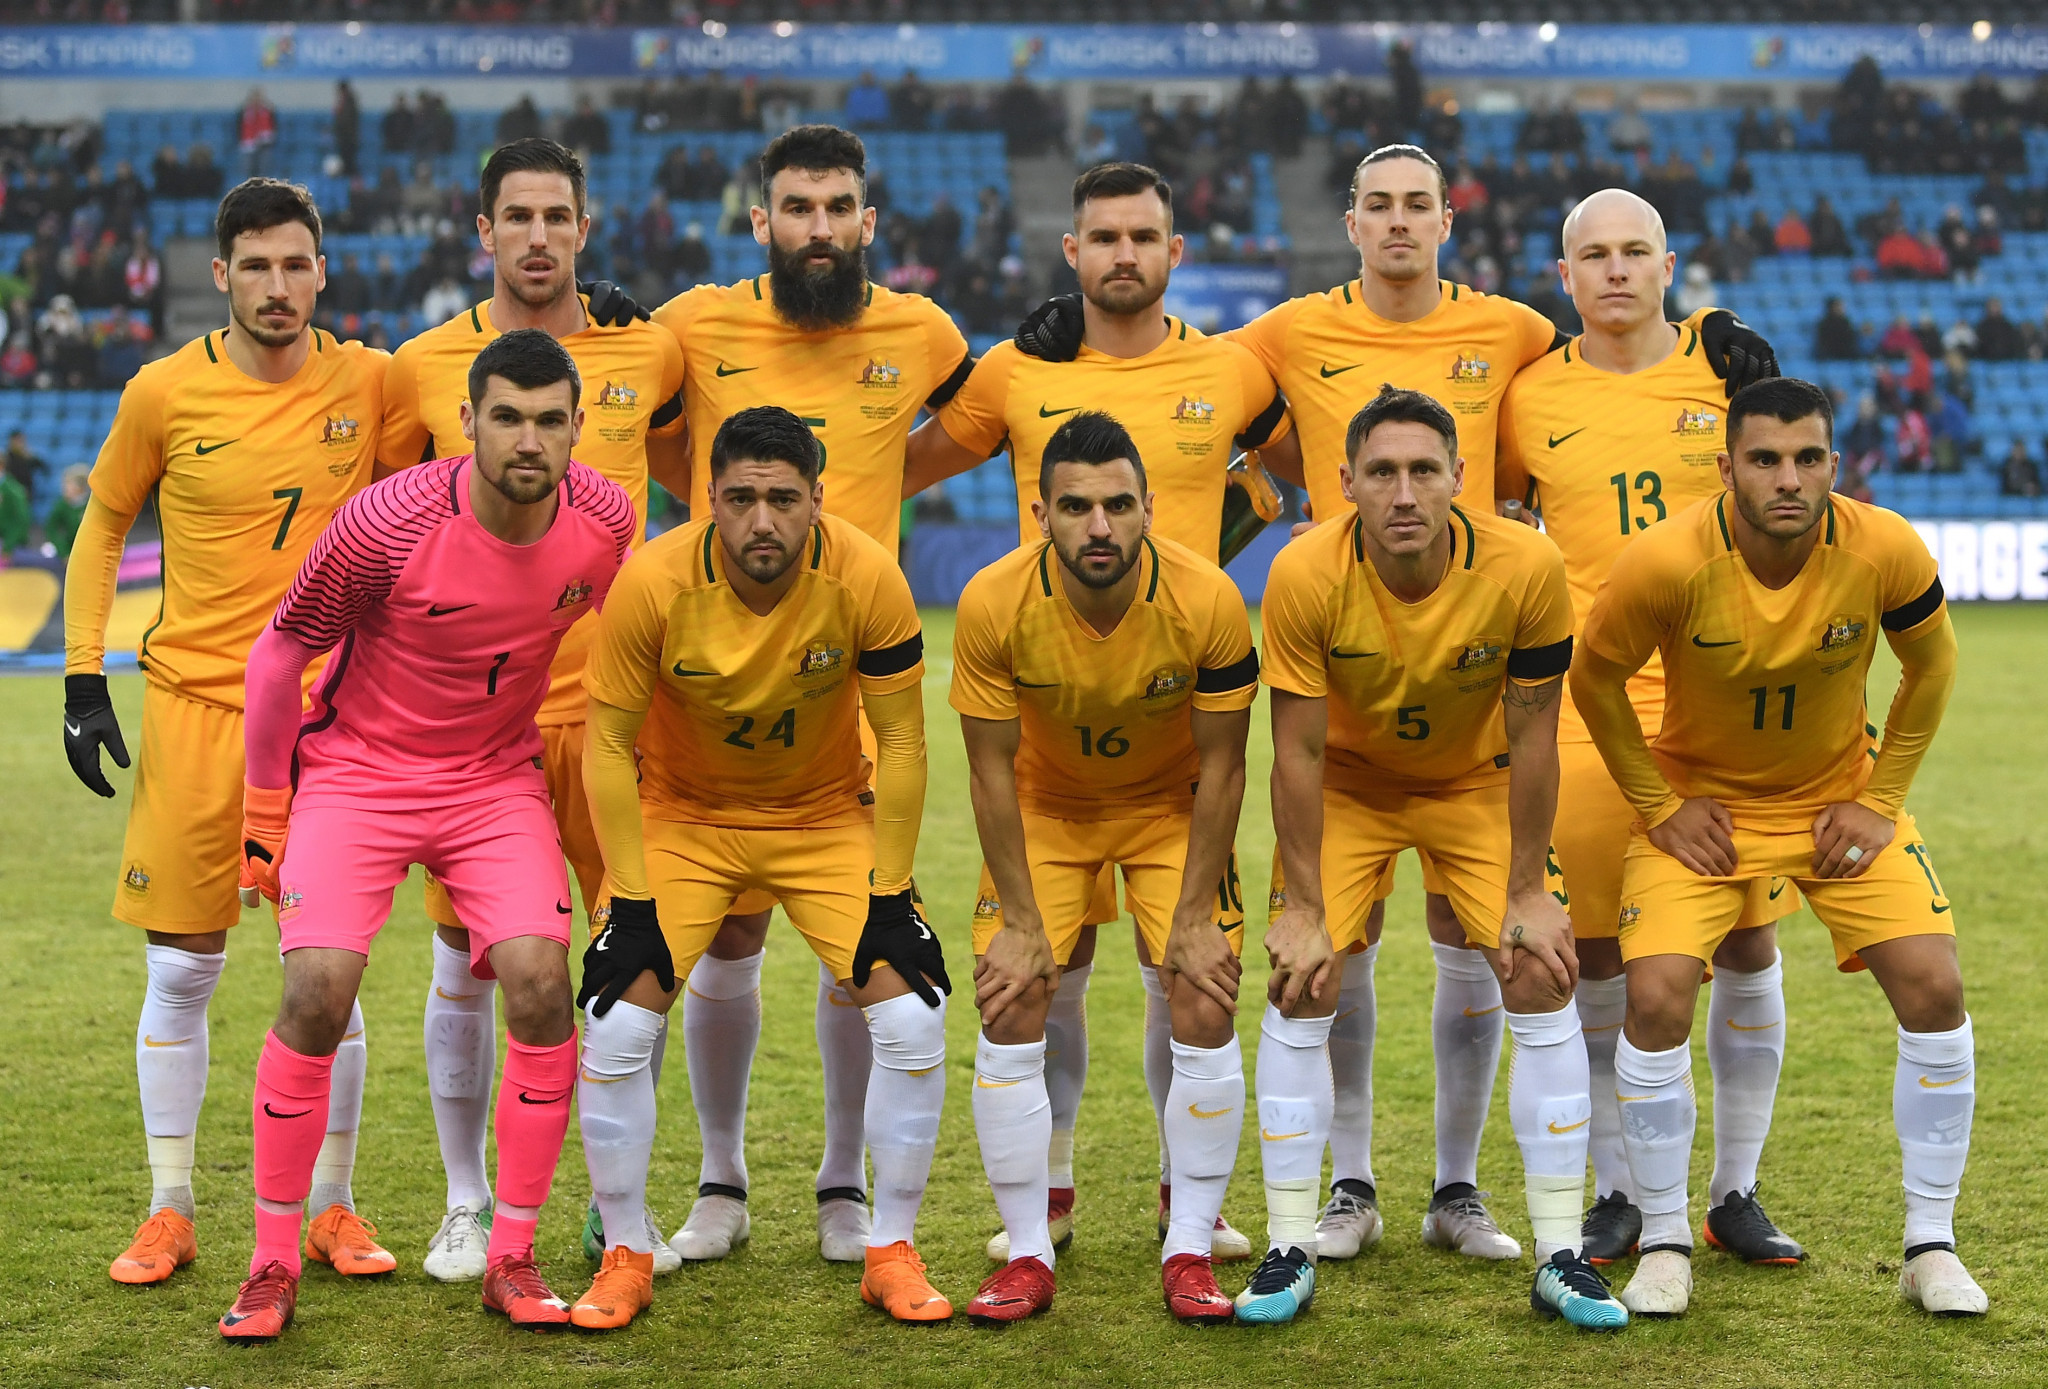 Australian Foreign Minister insists team will not boycott World Cup